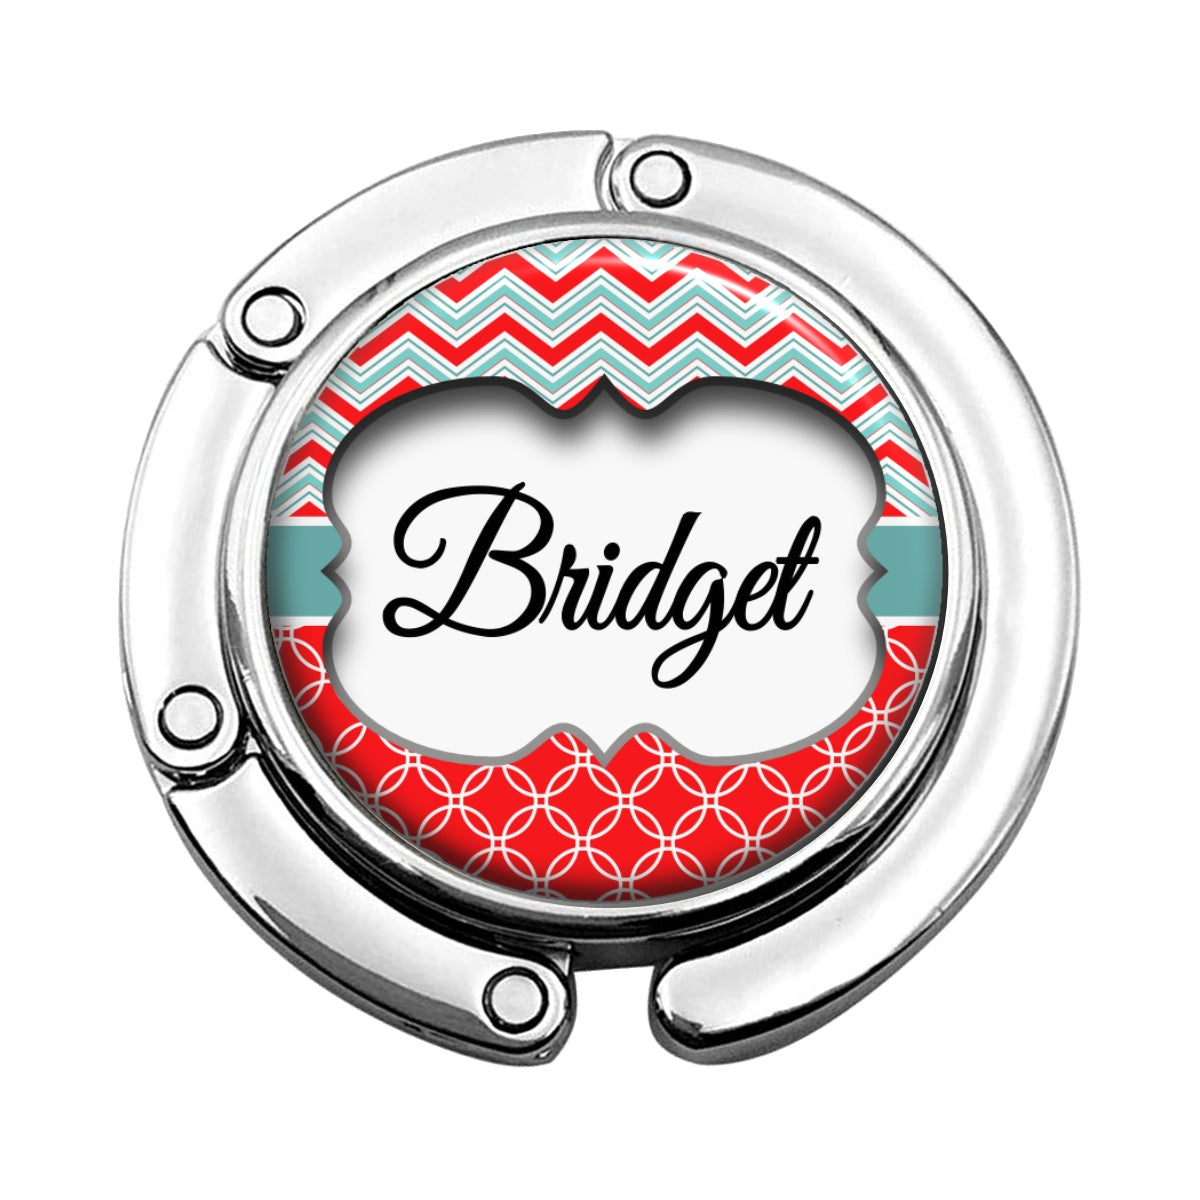 a badge with the word bridge on it